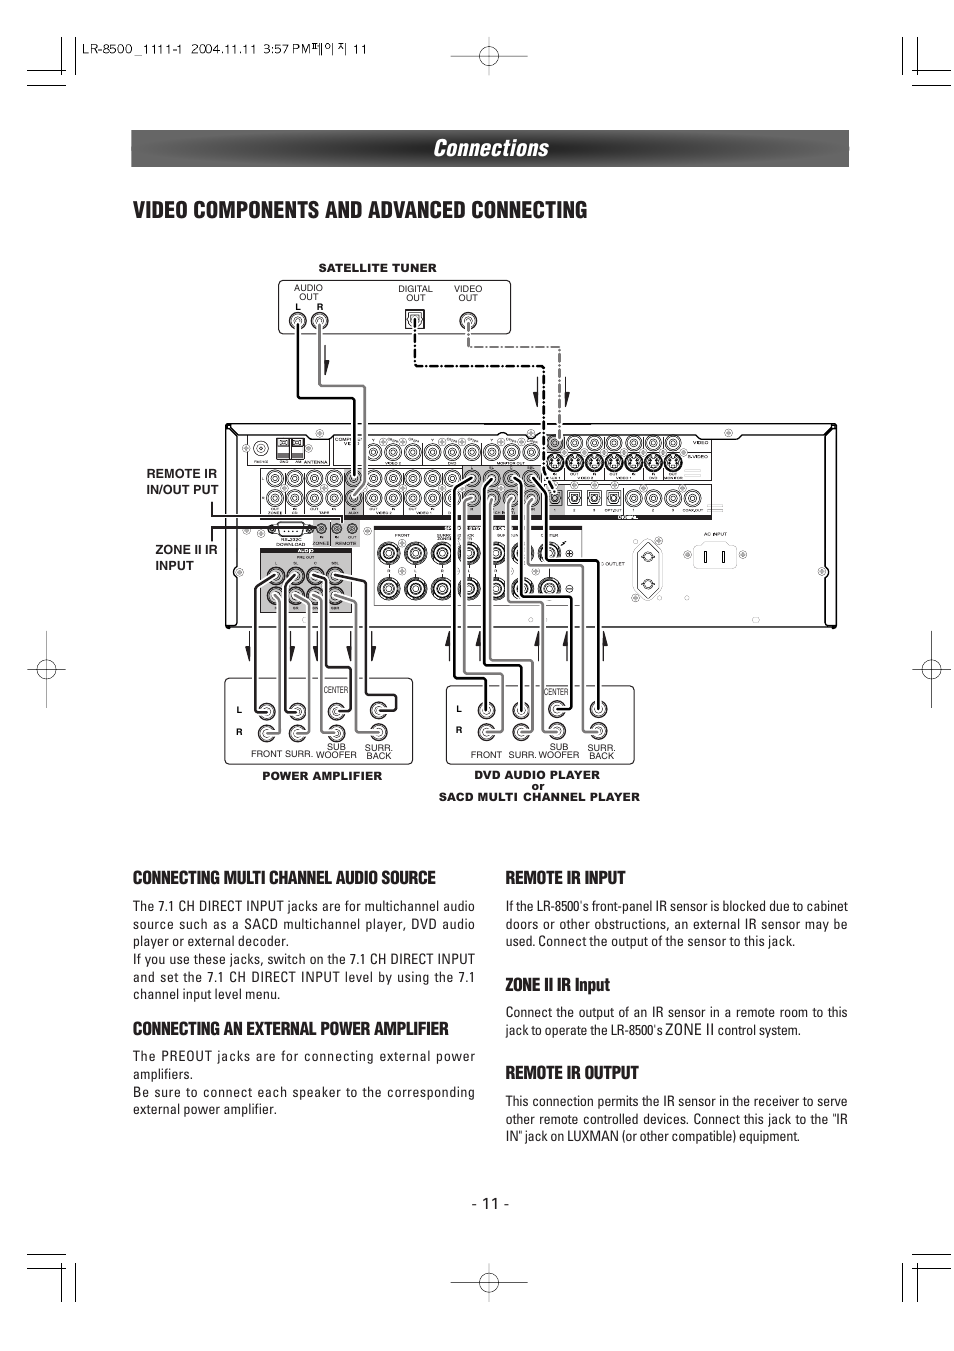 Video components and advanced connecting, Connections, Connecting multi channel audio source | Connecting an external power amplifier, Remote ir input, Zone ii ir input, Remote ir output, Zone ii | Luxman LR-8500 User Manual | Page 11 / 41